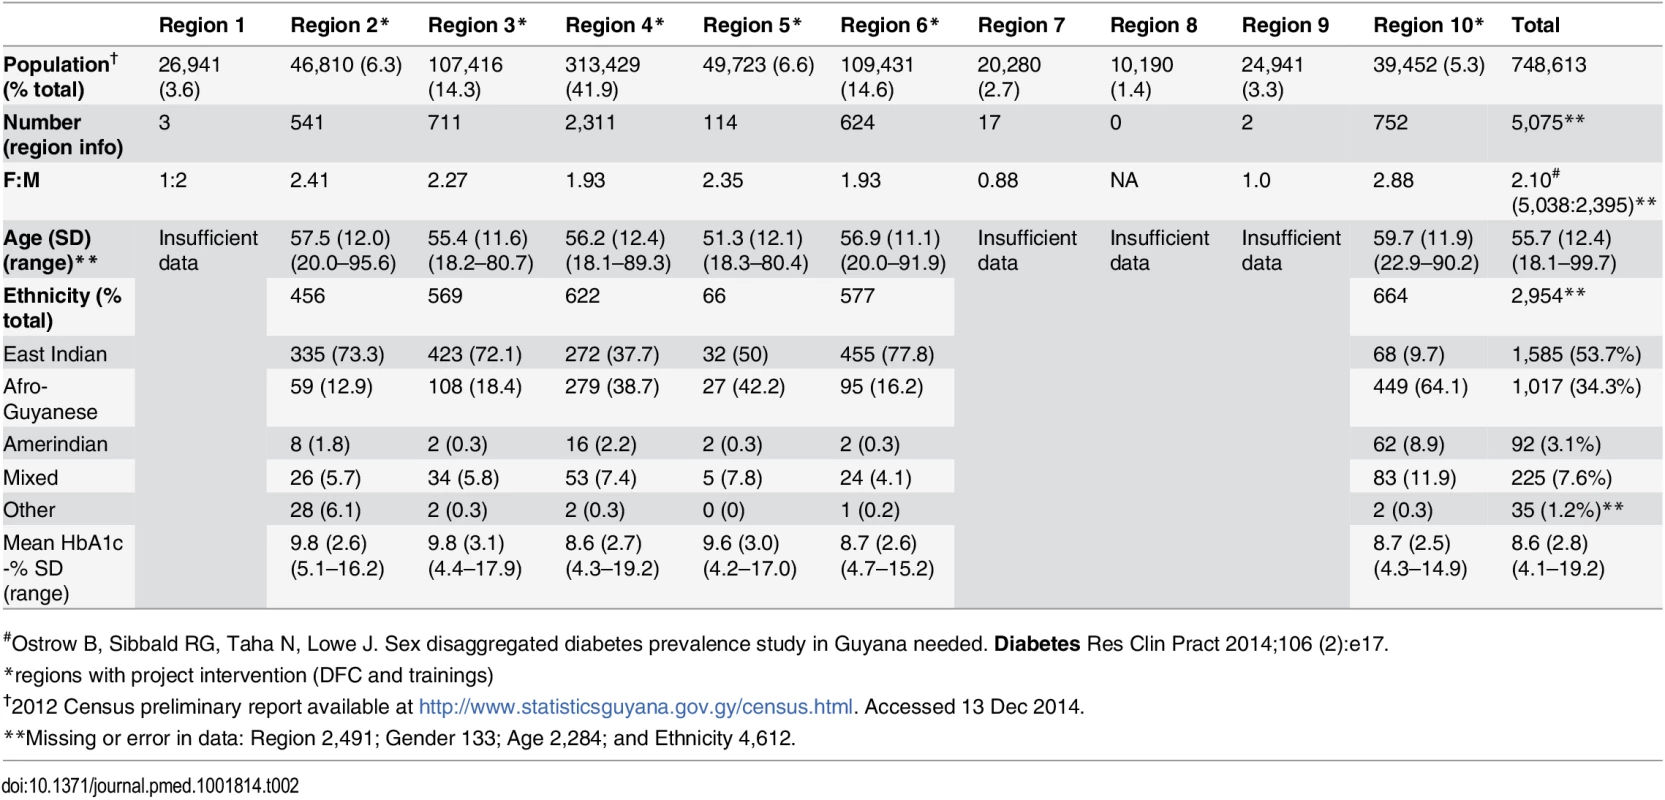 GDFP database by region, female-to-male ratio (F:M), age, ethnicity and HbA1c.